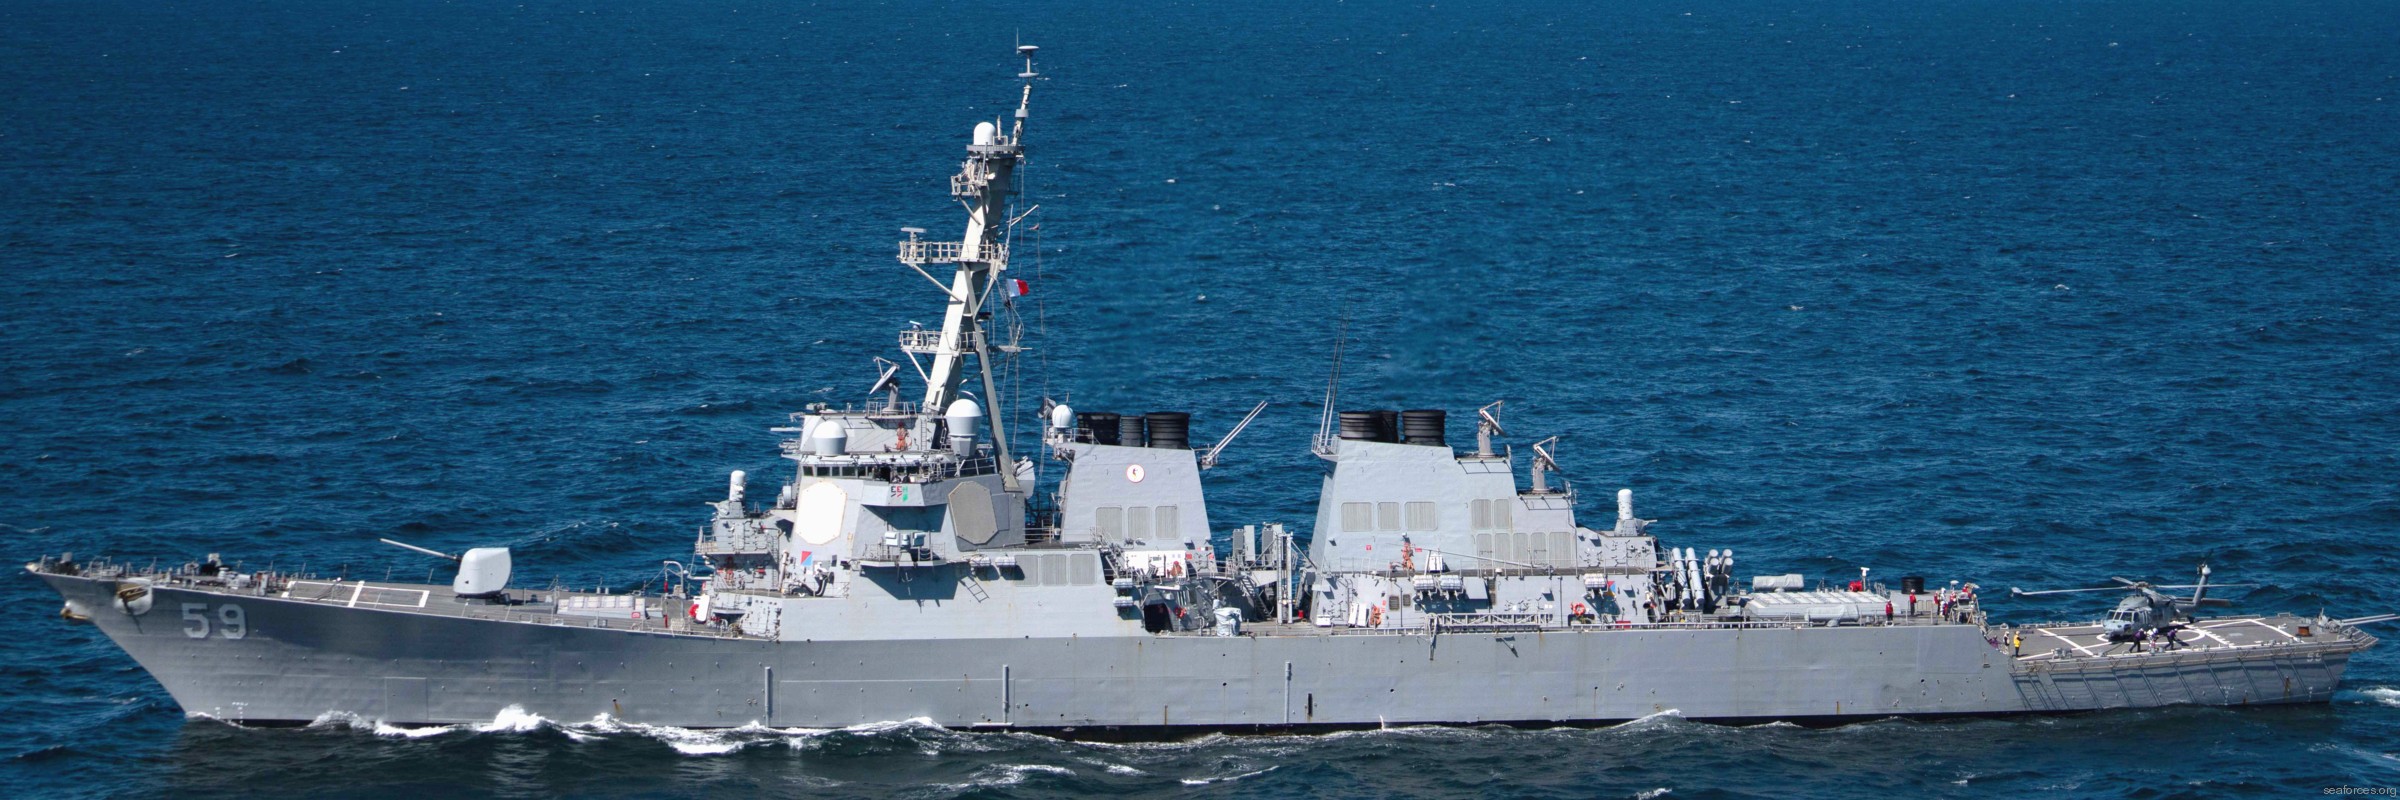 ddg-59 uss russell arleigh burke class guided missile destroyer us navy aegis 63 gulf of alaska